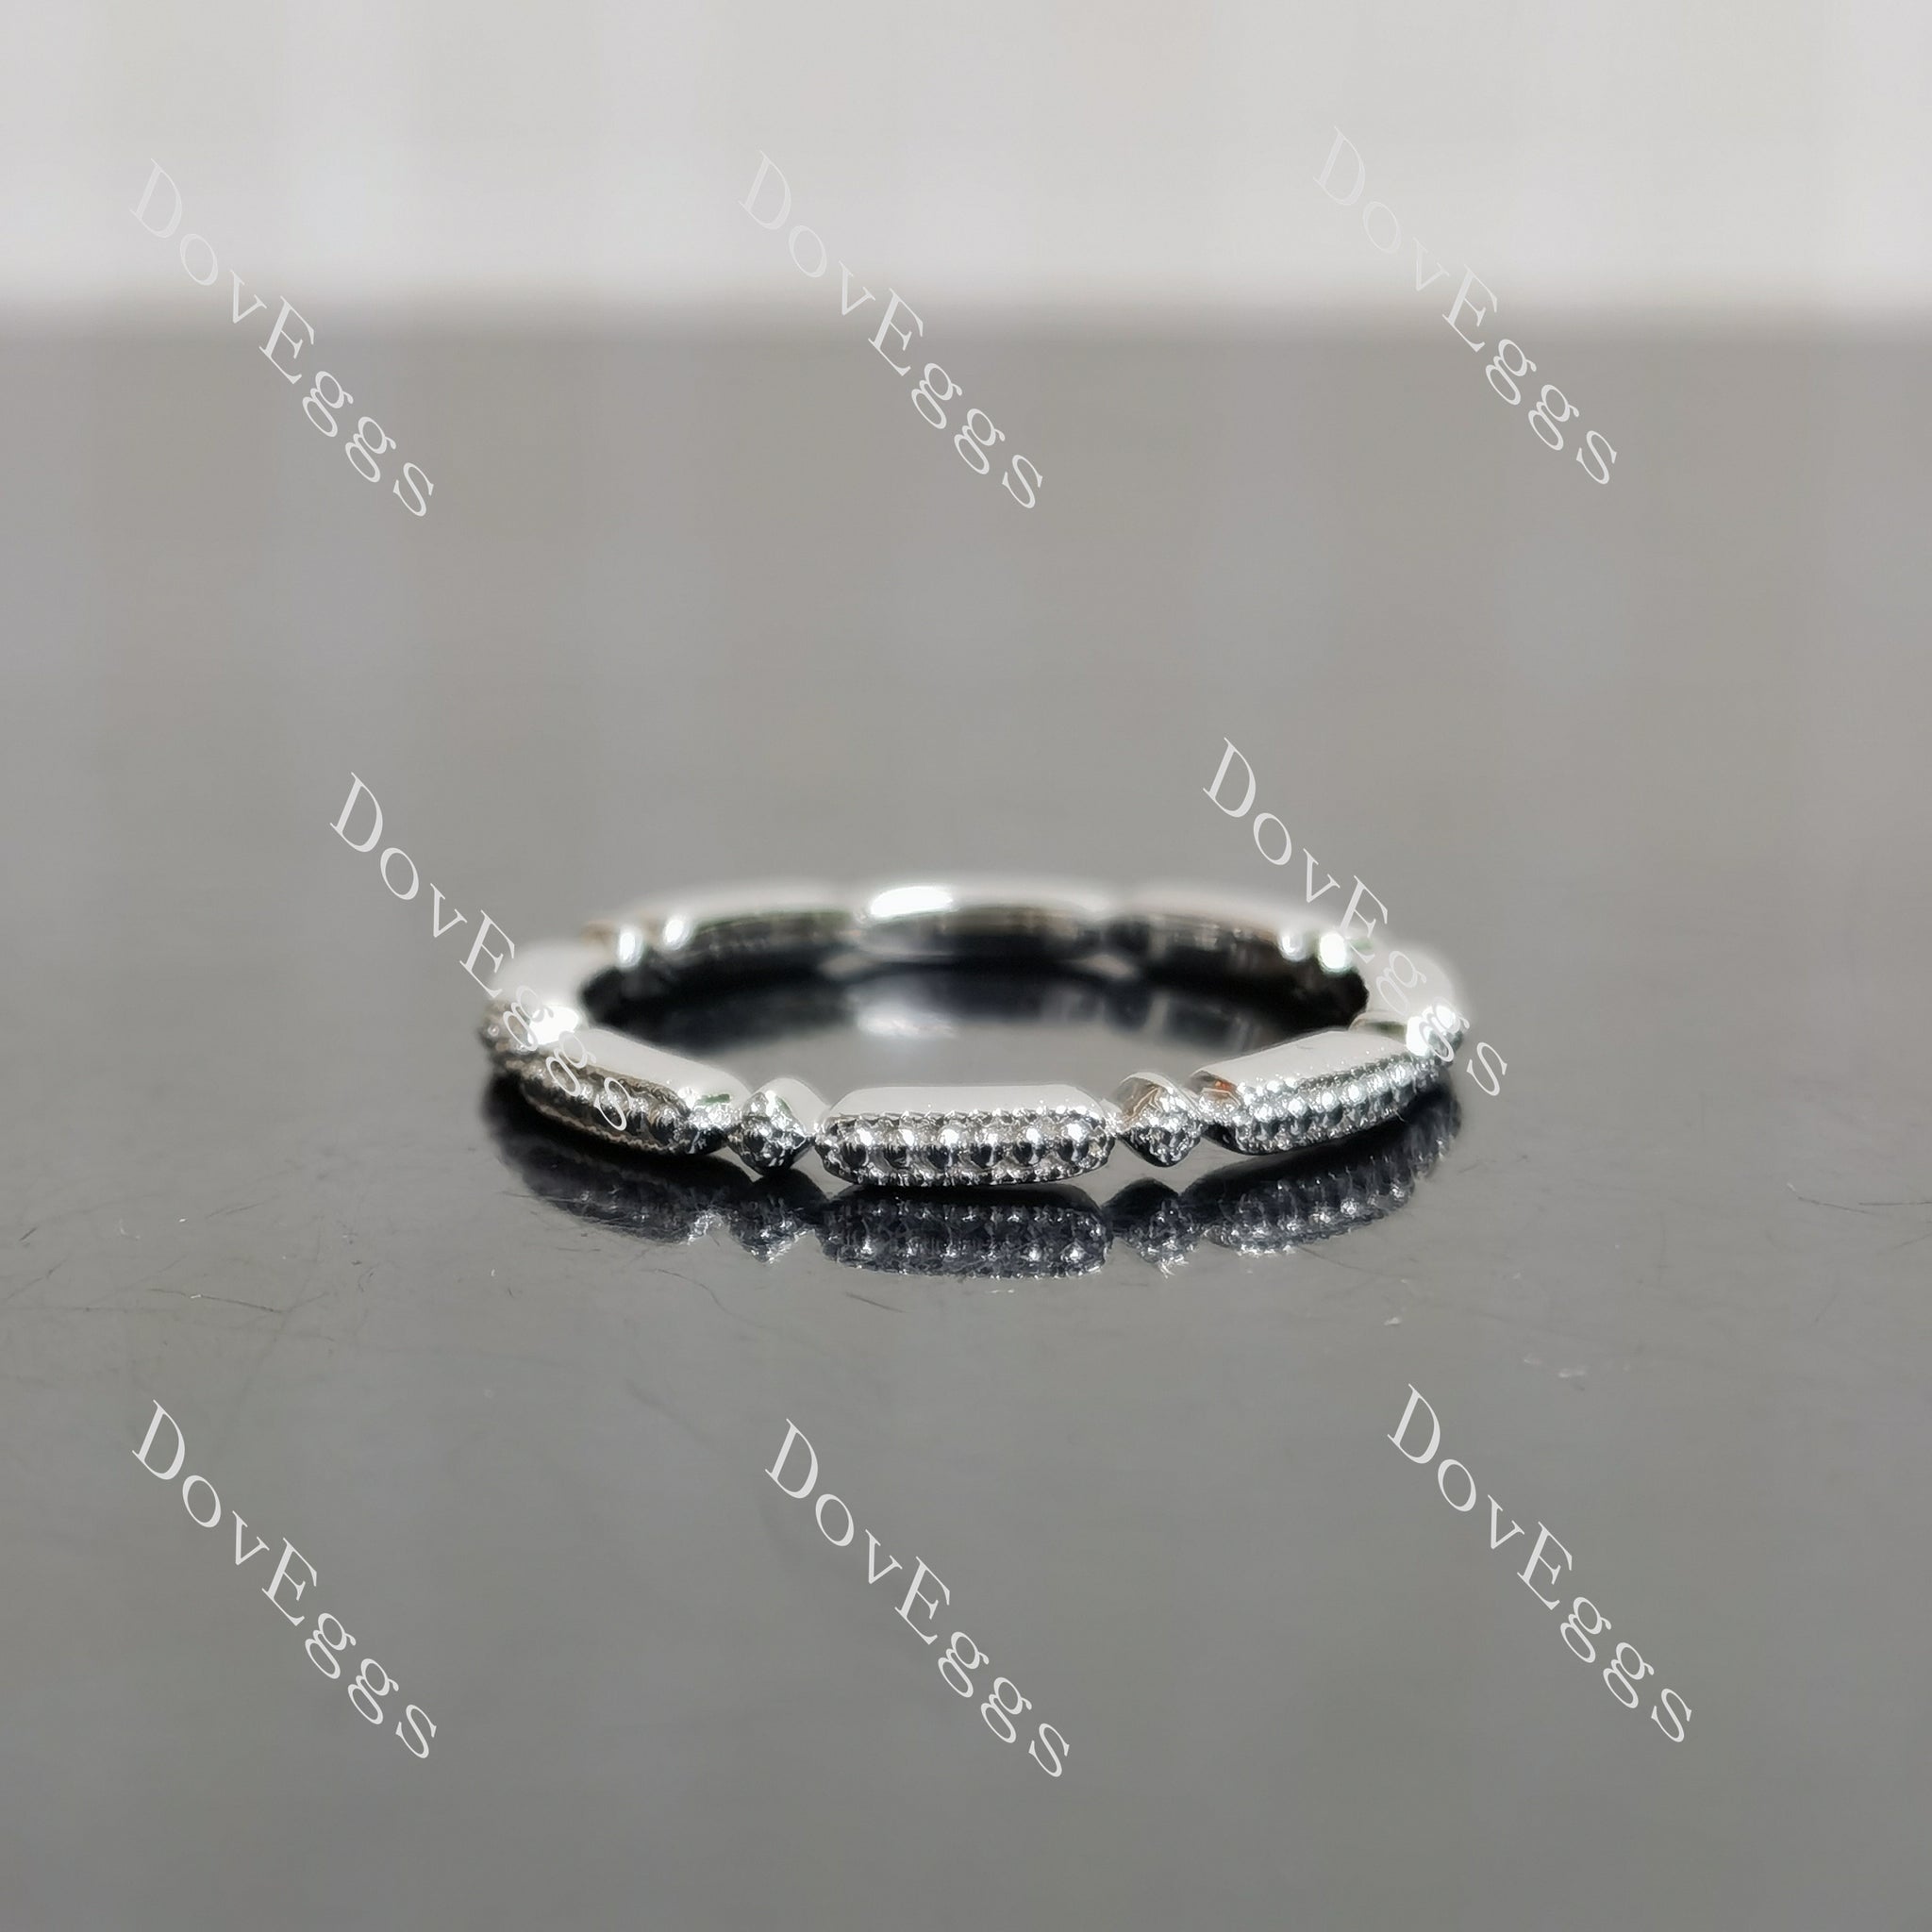 Doveggs small beaded stacking wedding band-2.0mm band width